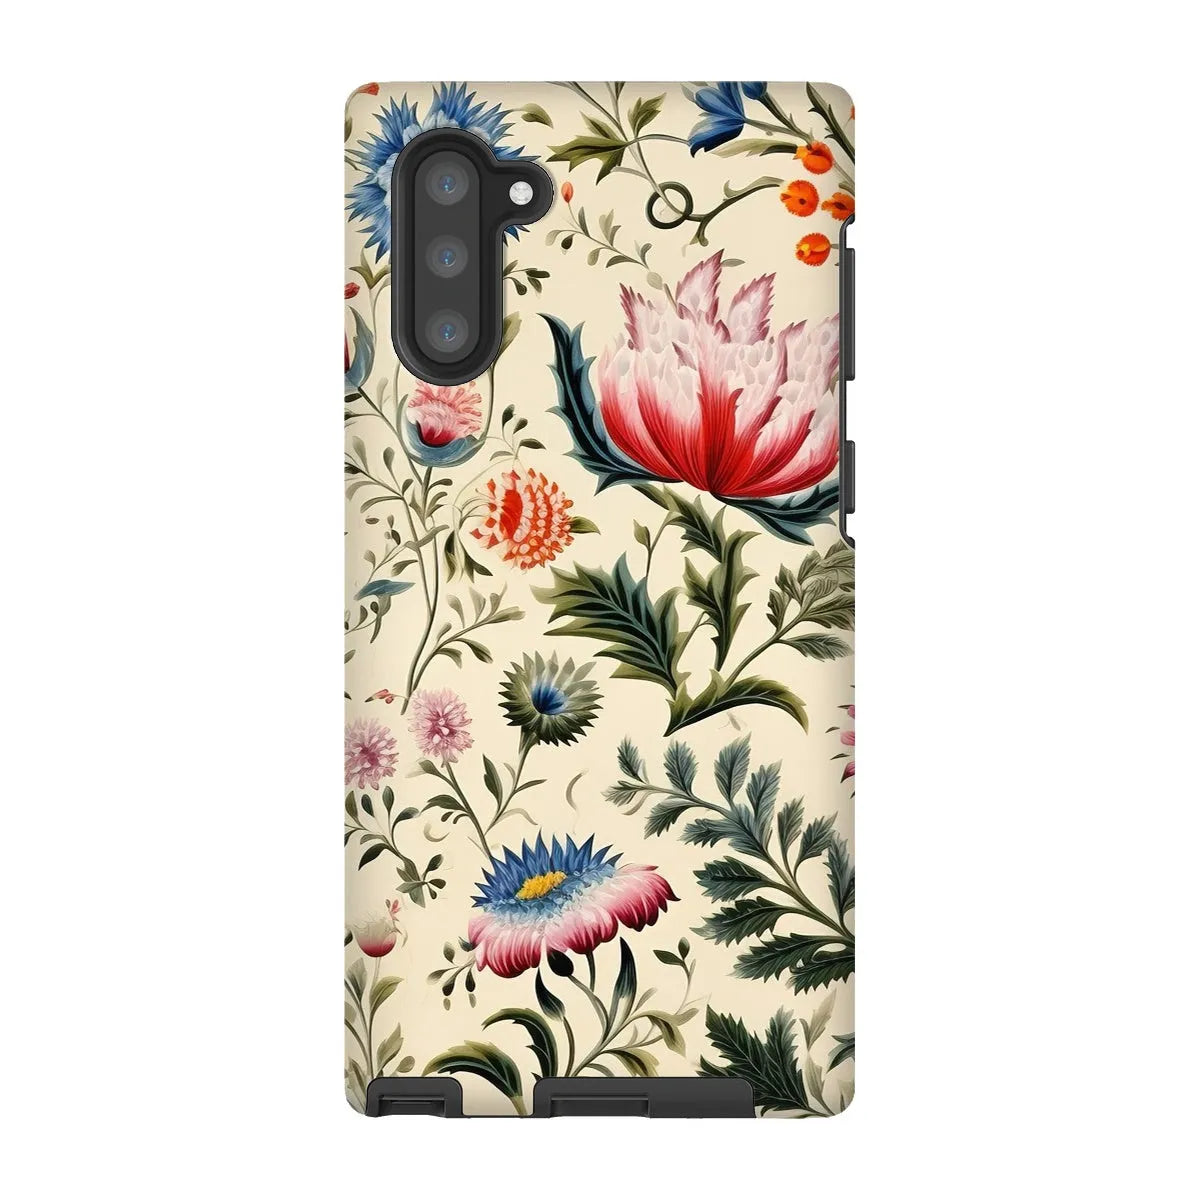 Wildflower Hoopla - Floral Garden Aesthetic Phone Case - Samsung Galaxy Note 10 / Matte - Mobile Phone Cases